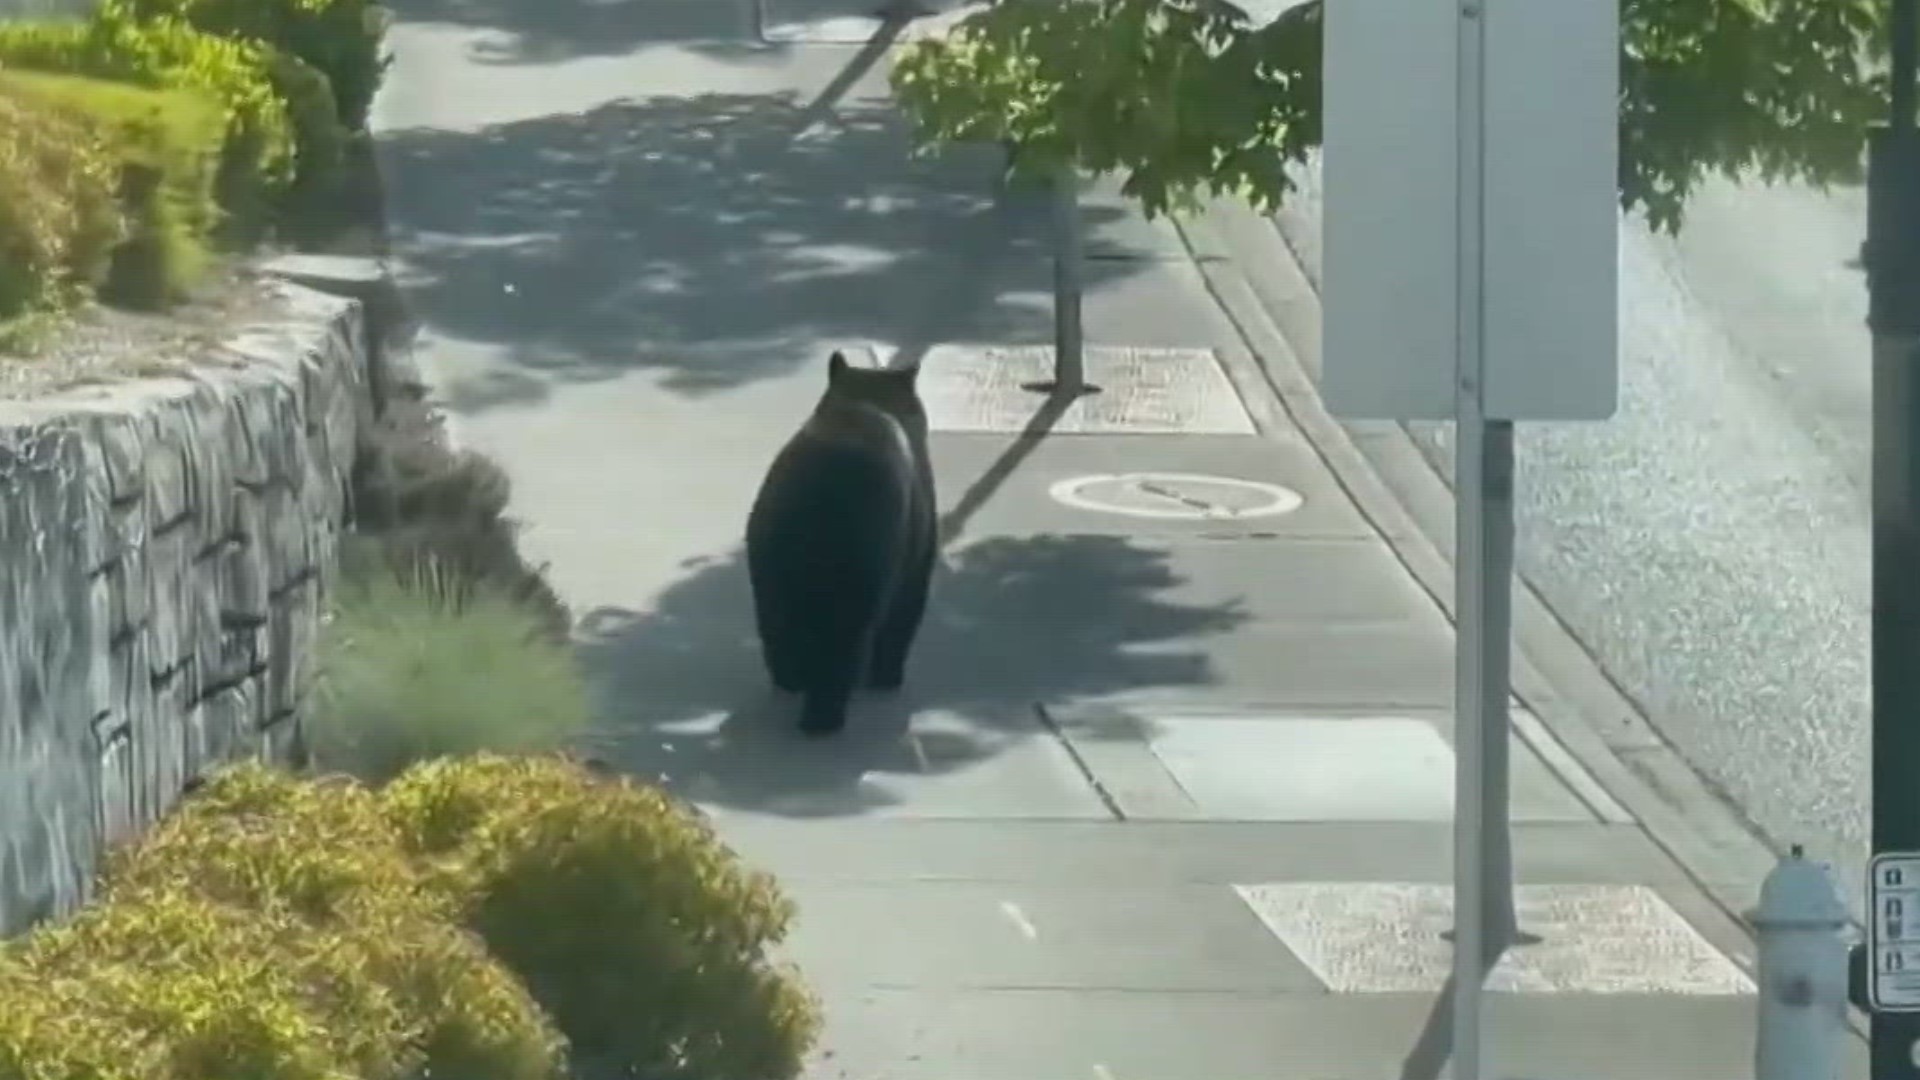 The black bear was spotted in Issaquah on Thursday. State officials warn to not approach black bears and to not run away